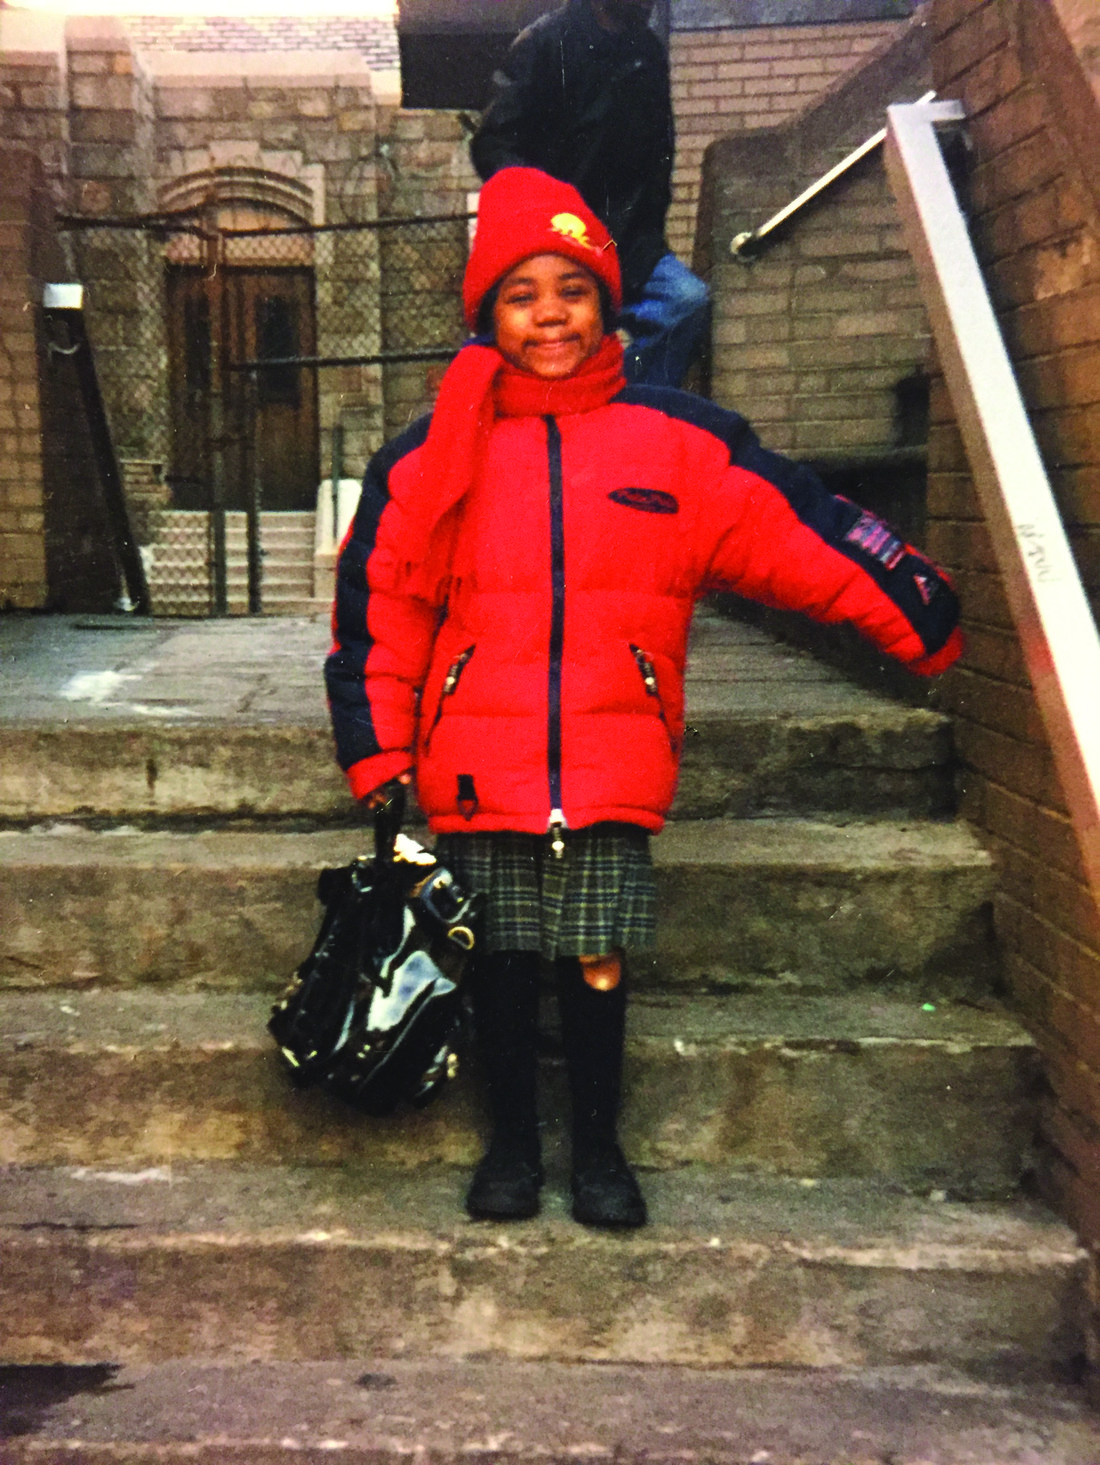 Aaliyah Hodge as a 6-year-old schoolgirl in New York. She is wearing a bright red jacket and standing on a staircase